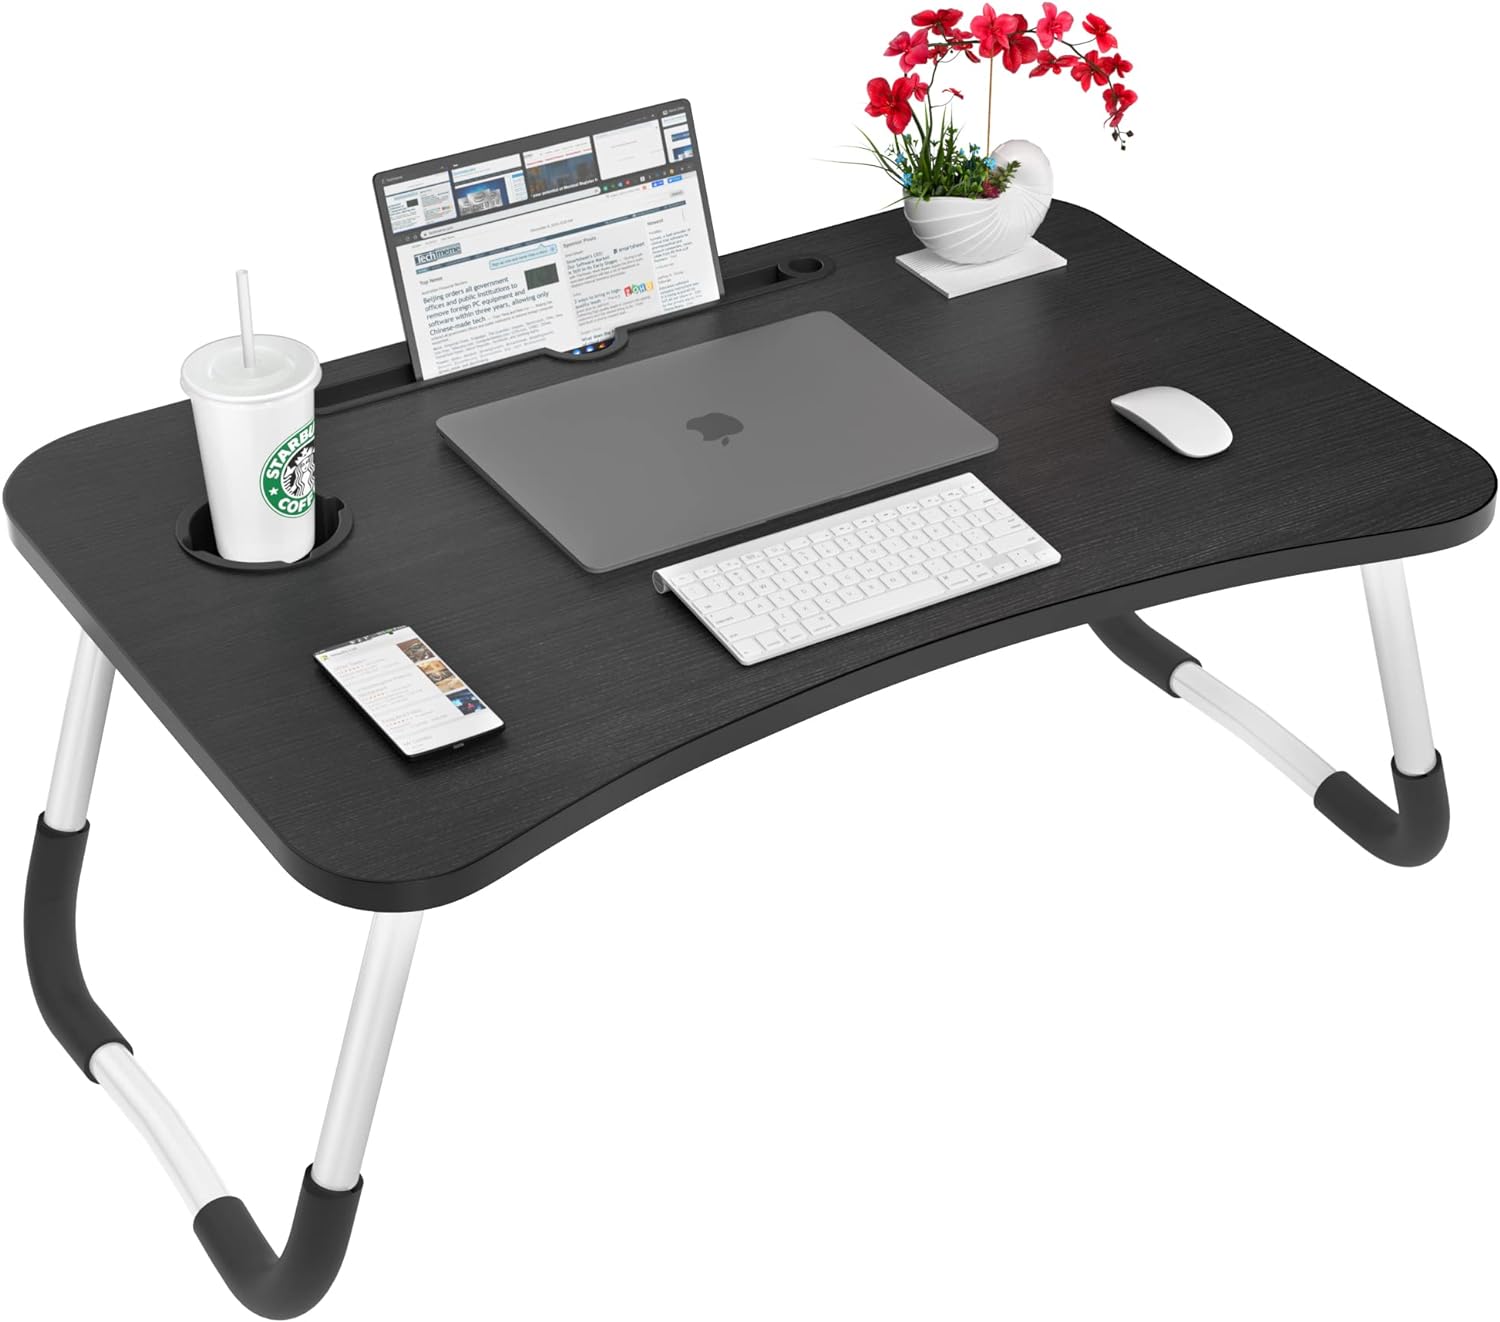 Astoryou Lap Desk, Foldable Laptop Table for Bed Portable Bed Desk for Laptop with Cup Holder, Laptop Desk Bed Trays for Working, Eating and Writing (Black)